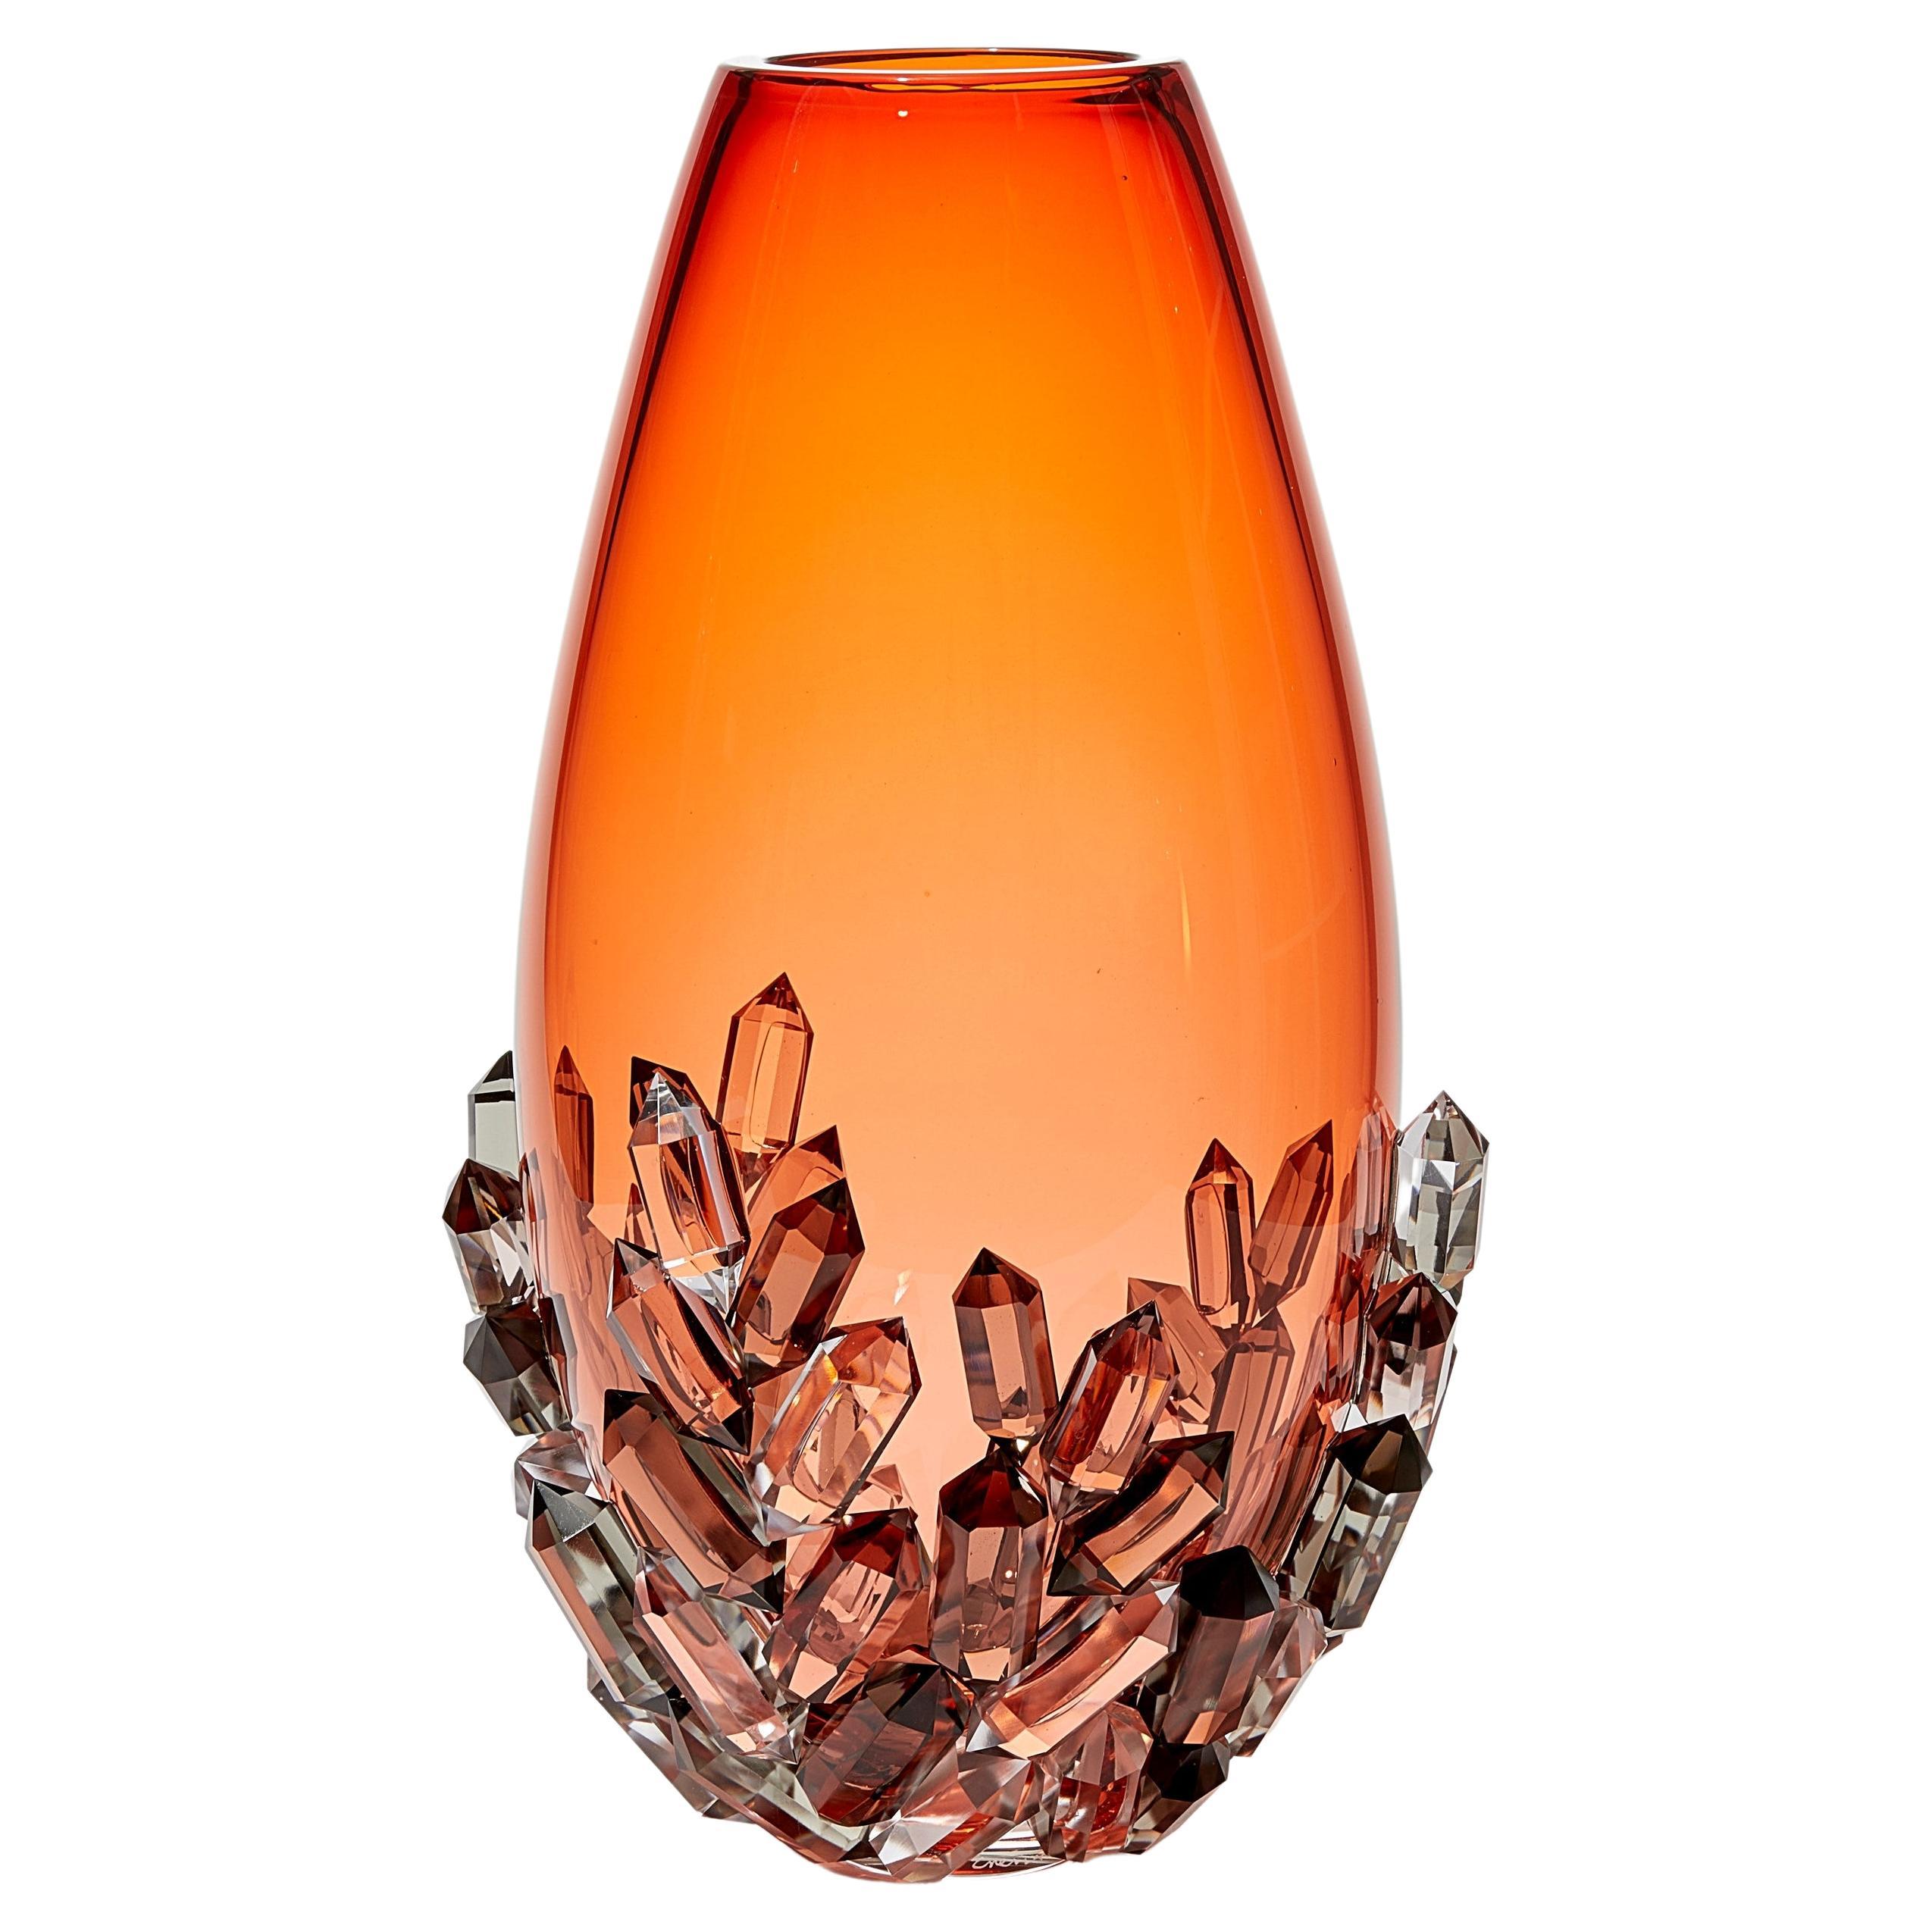 Cristallized Aurora, a peach glass vase with cut crystals by Hanne Enemark